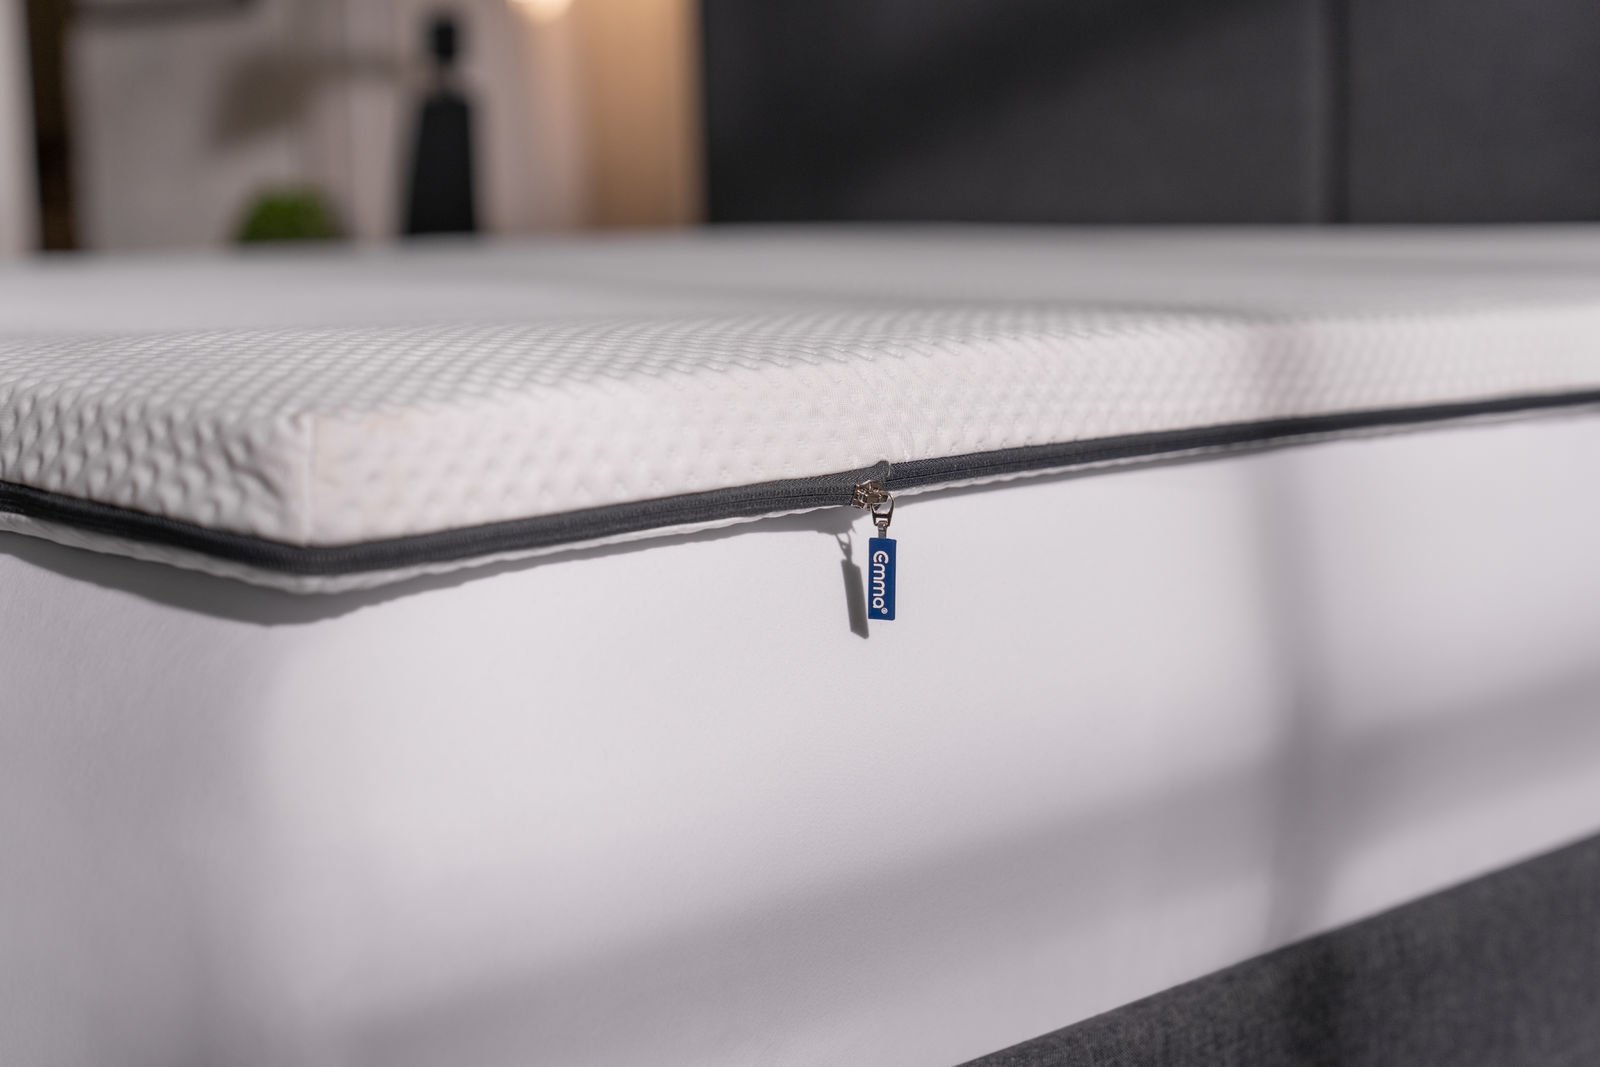 Flip Topper | Bedbuyer Review with Discount